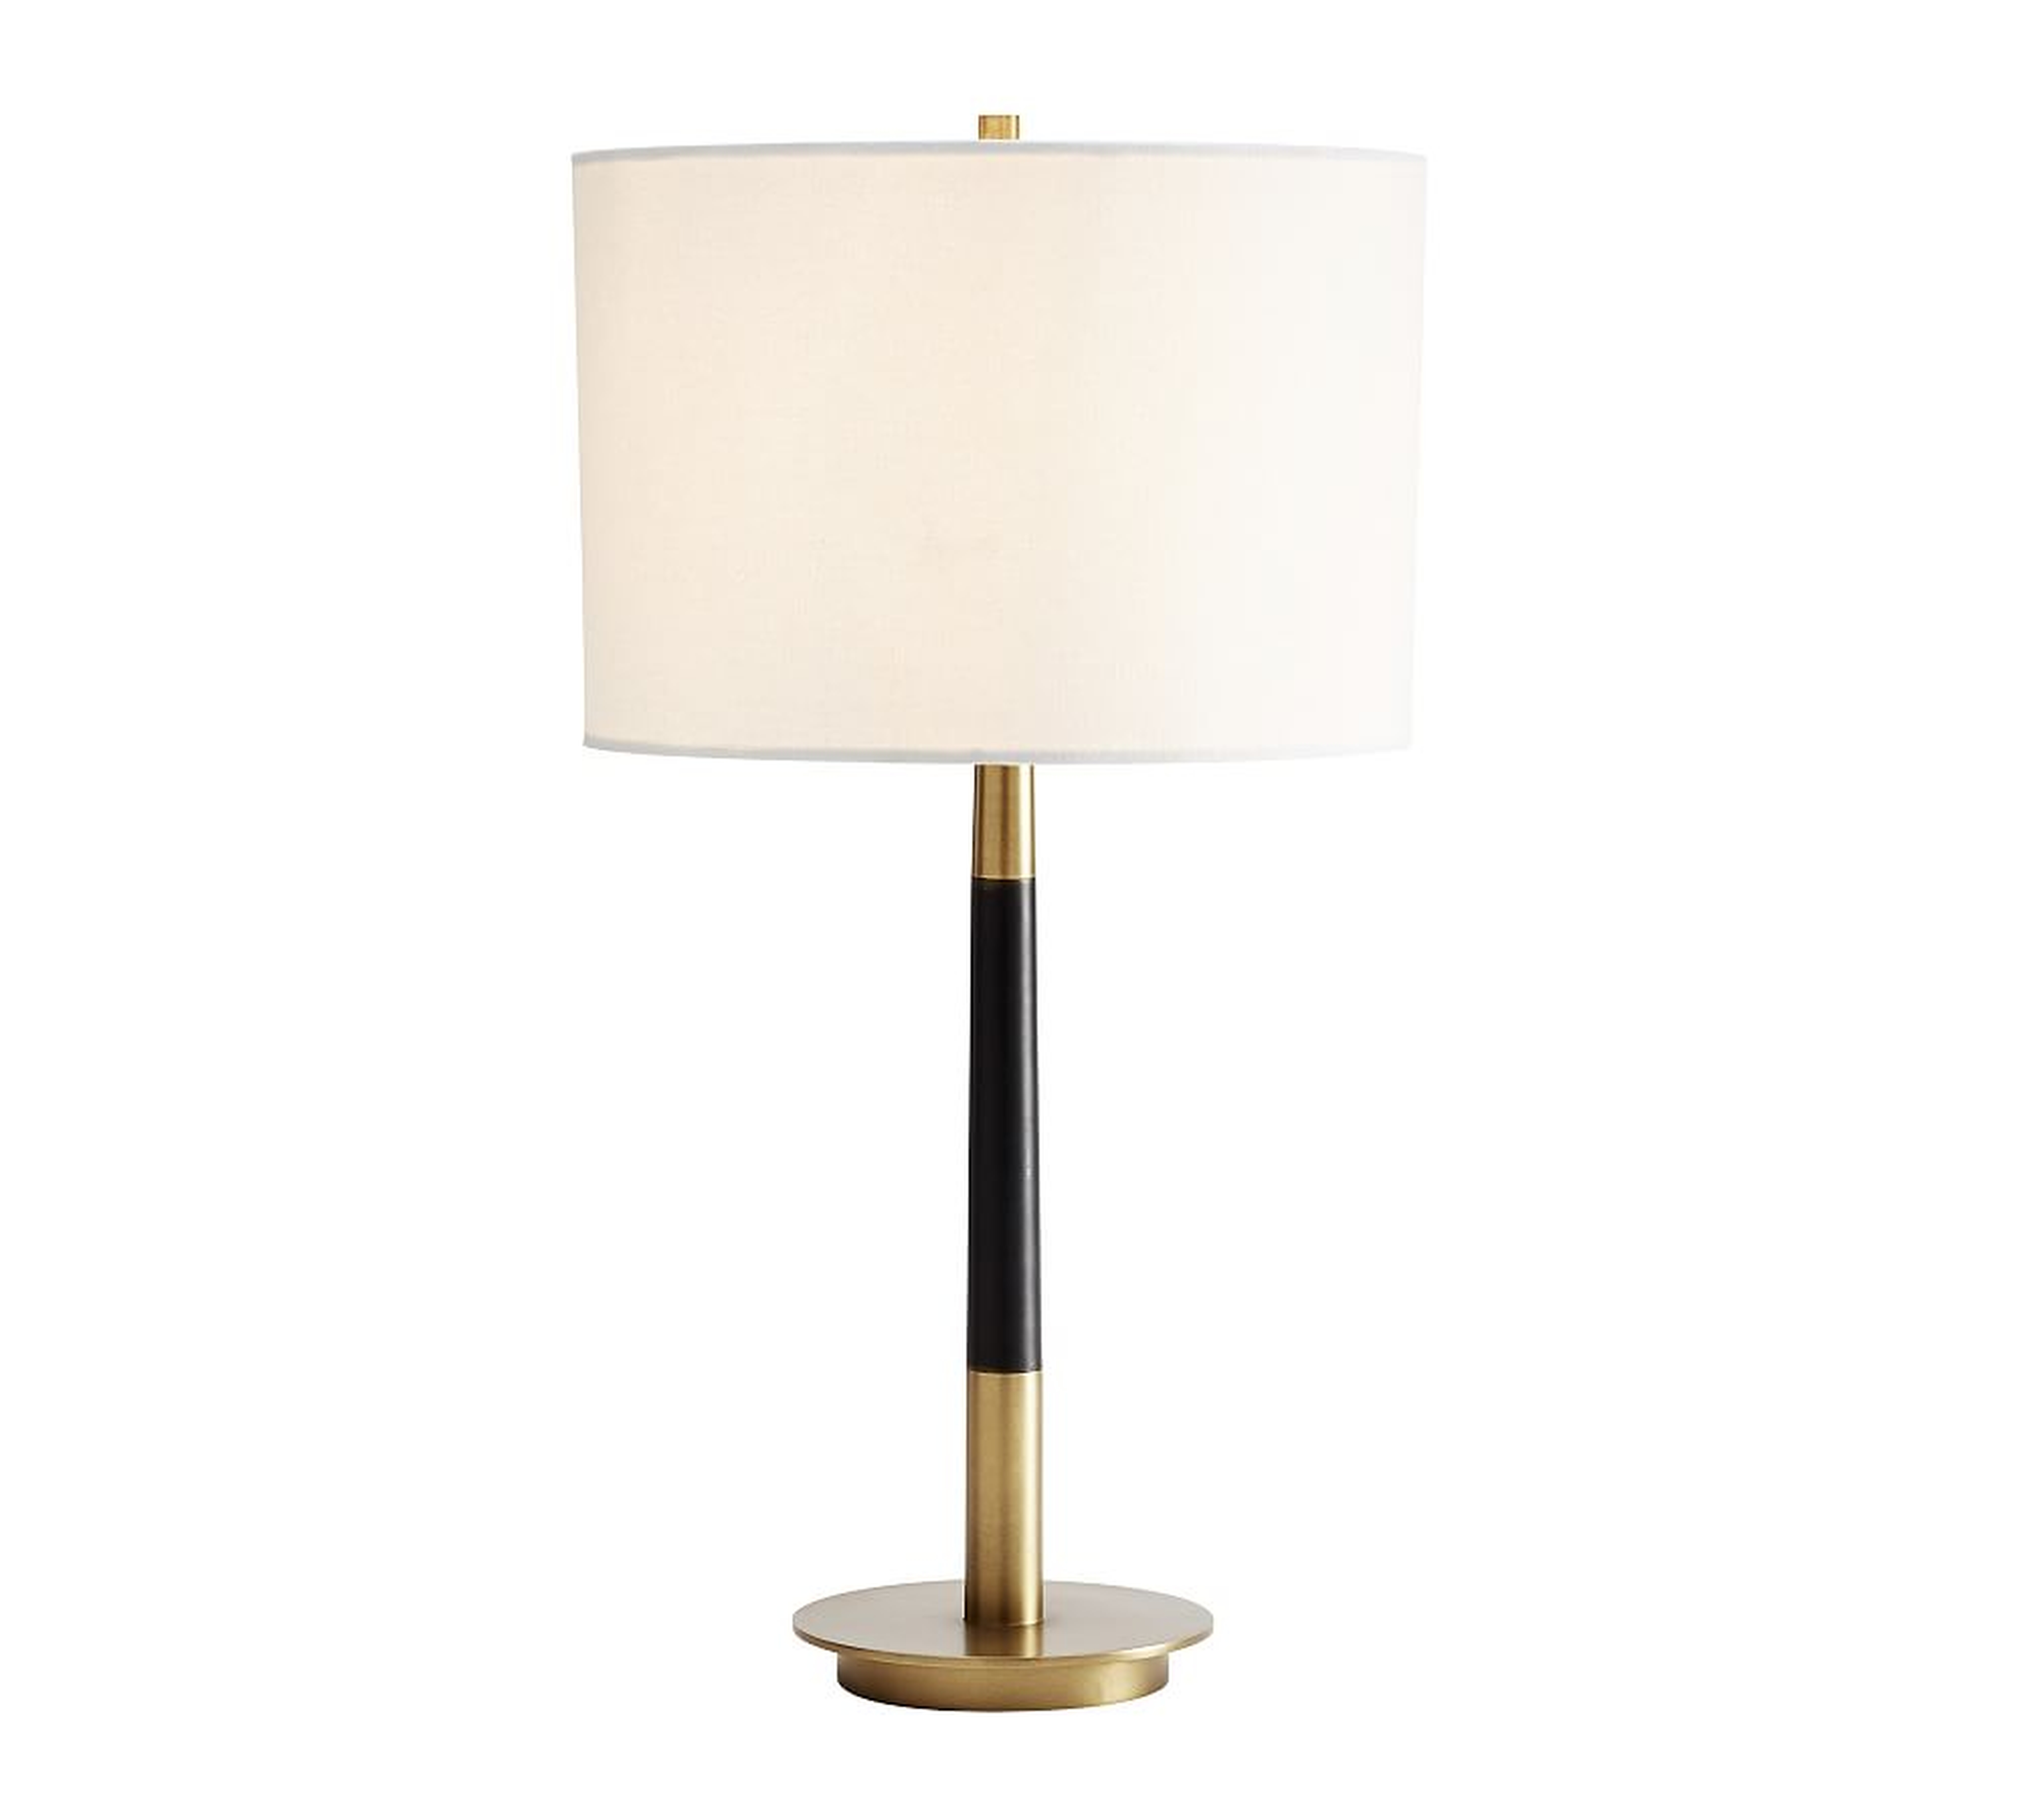 Reese Metal 17" Table Lamp, Tumbled Brass, Small - Pottery Barn